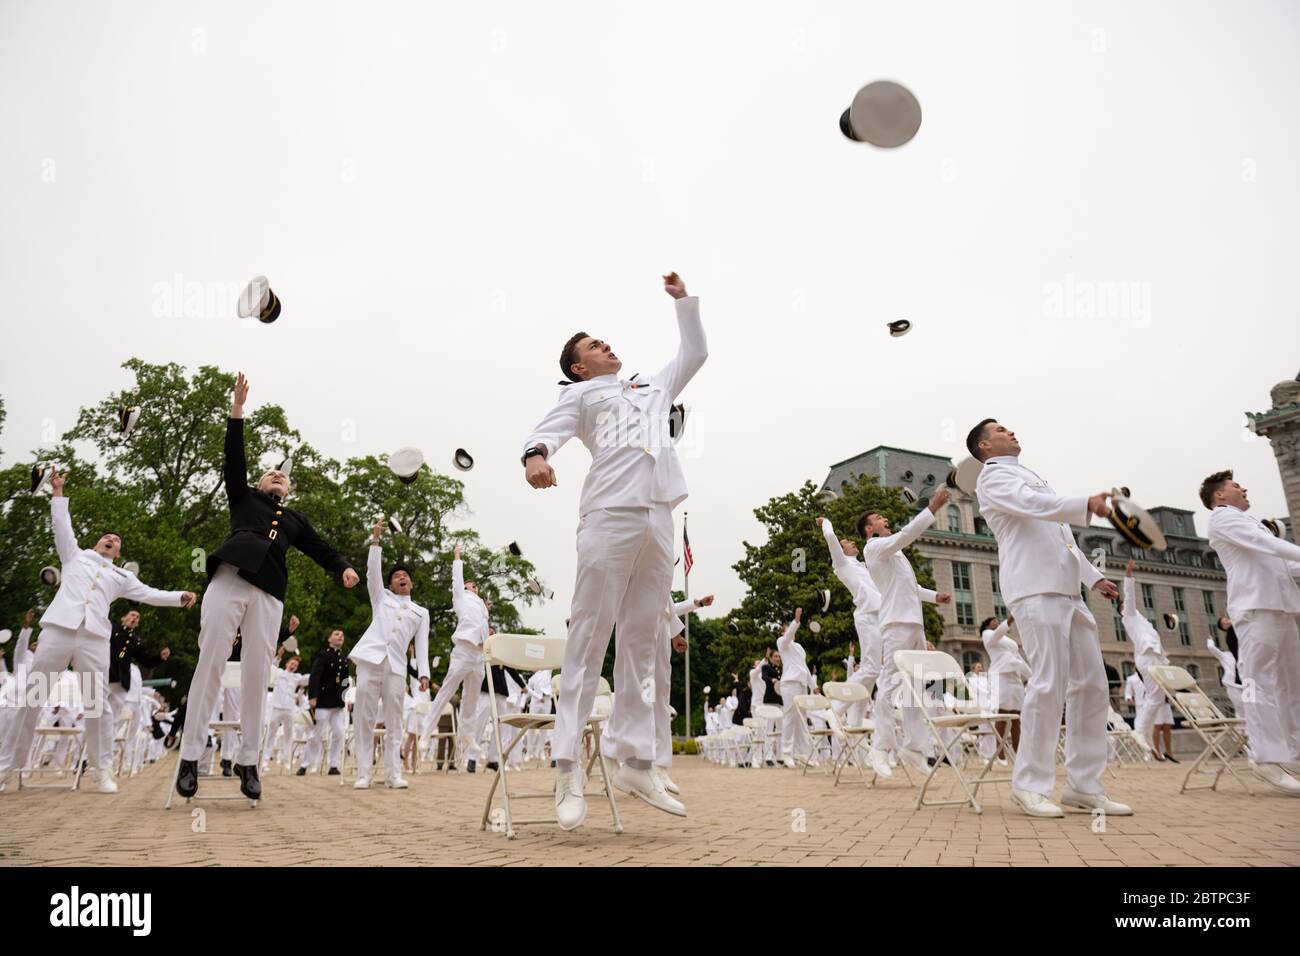 U.S. Naval Academy midshipmen toss their hats into the air at the conclusion of the commencement and commissioning ceremony for the Naval Academy Class of 2020 under COVID-19, coronavirus pandemic social distancing rules May 18, 2020 in Annapolis, Maryland. Approximately 1,000 midshipmen will graduate and be sworn-in during five events and one virtual ceremony. Stock Photo